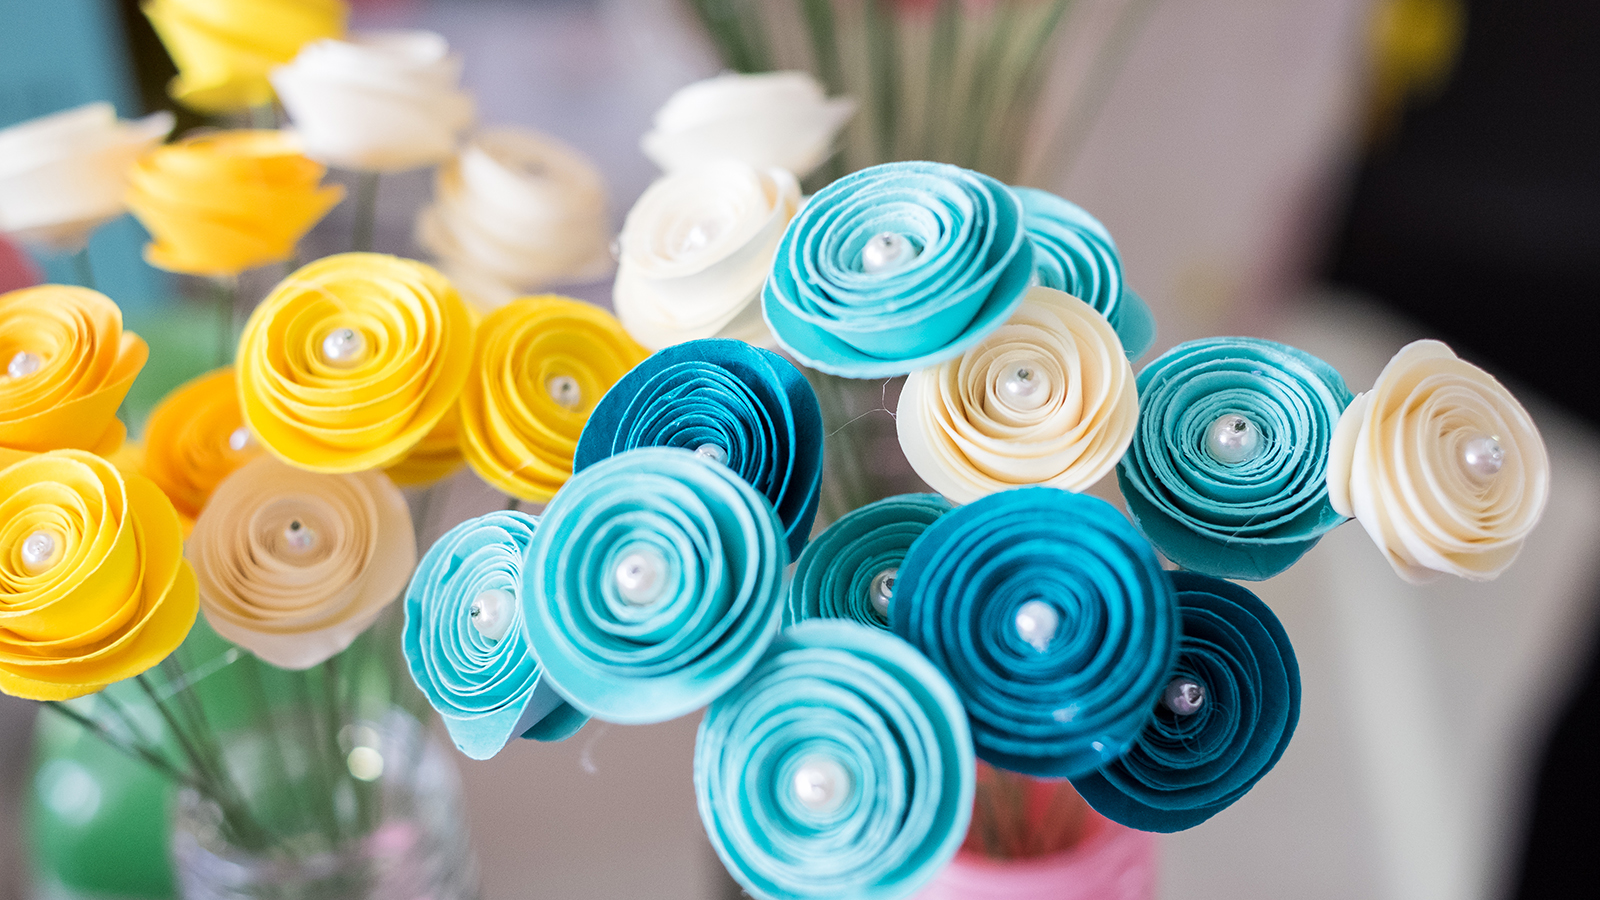 Colorful paper flowers handmade in a vase.